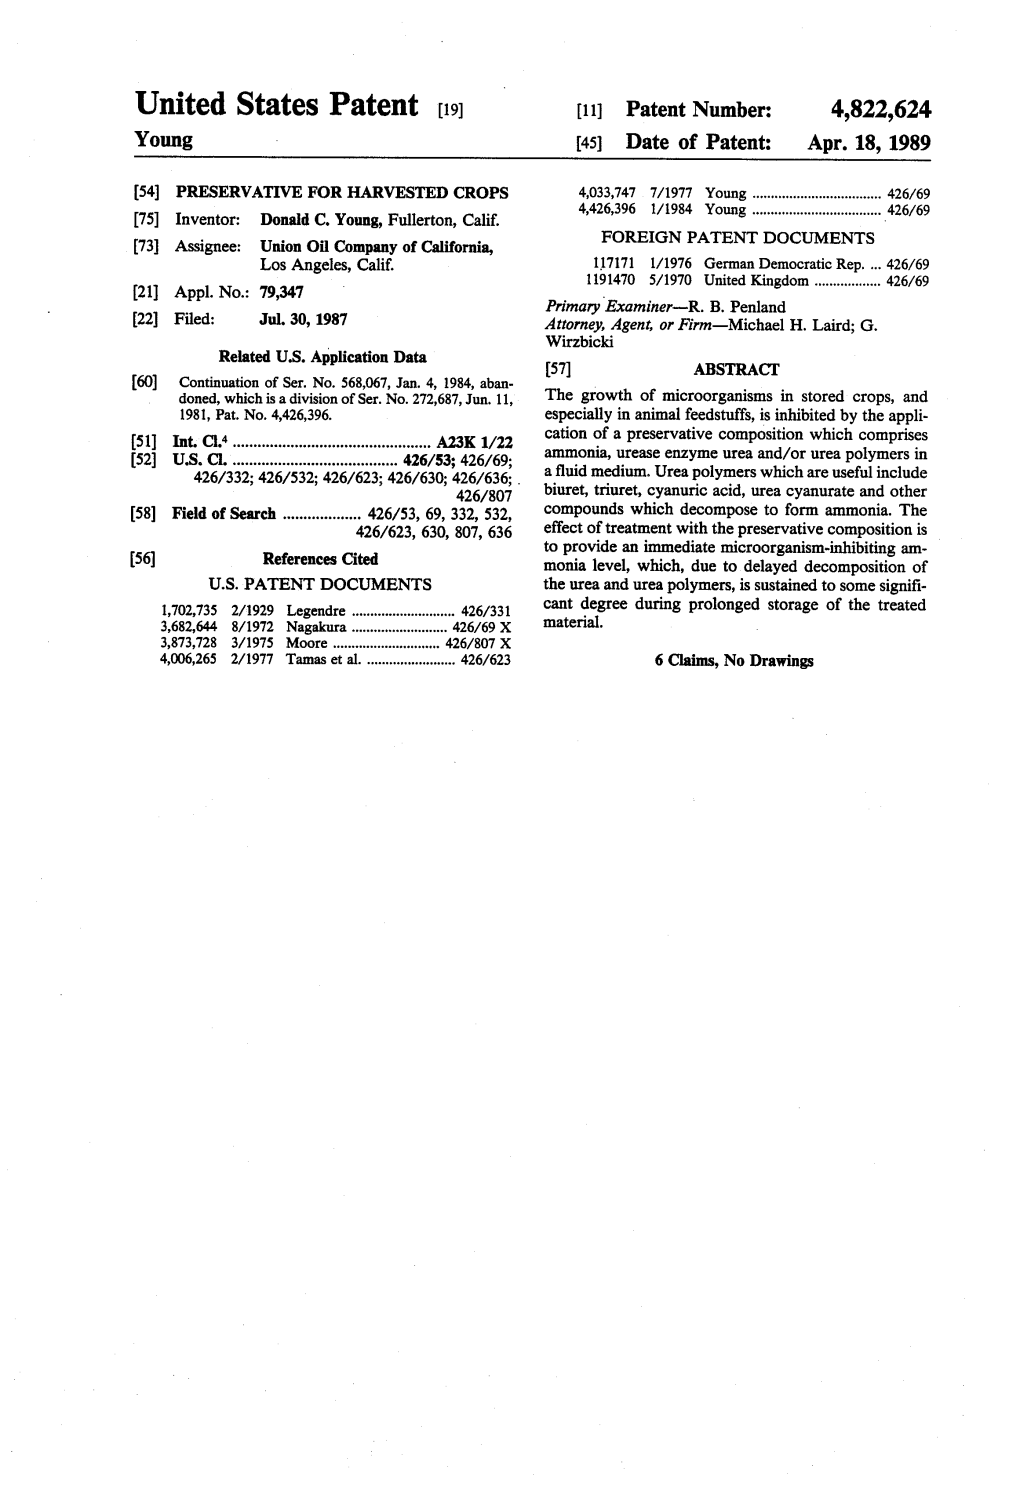 United States Patent (19) 11 Patent Number: 4,822,624 Young (45) Date of Patent: Apr